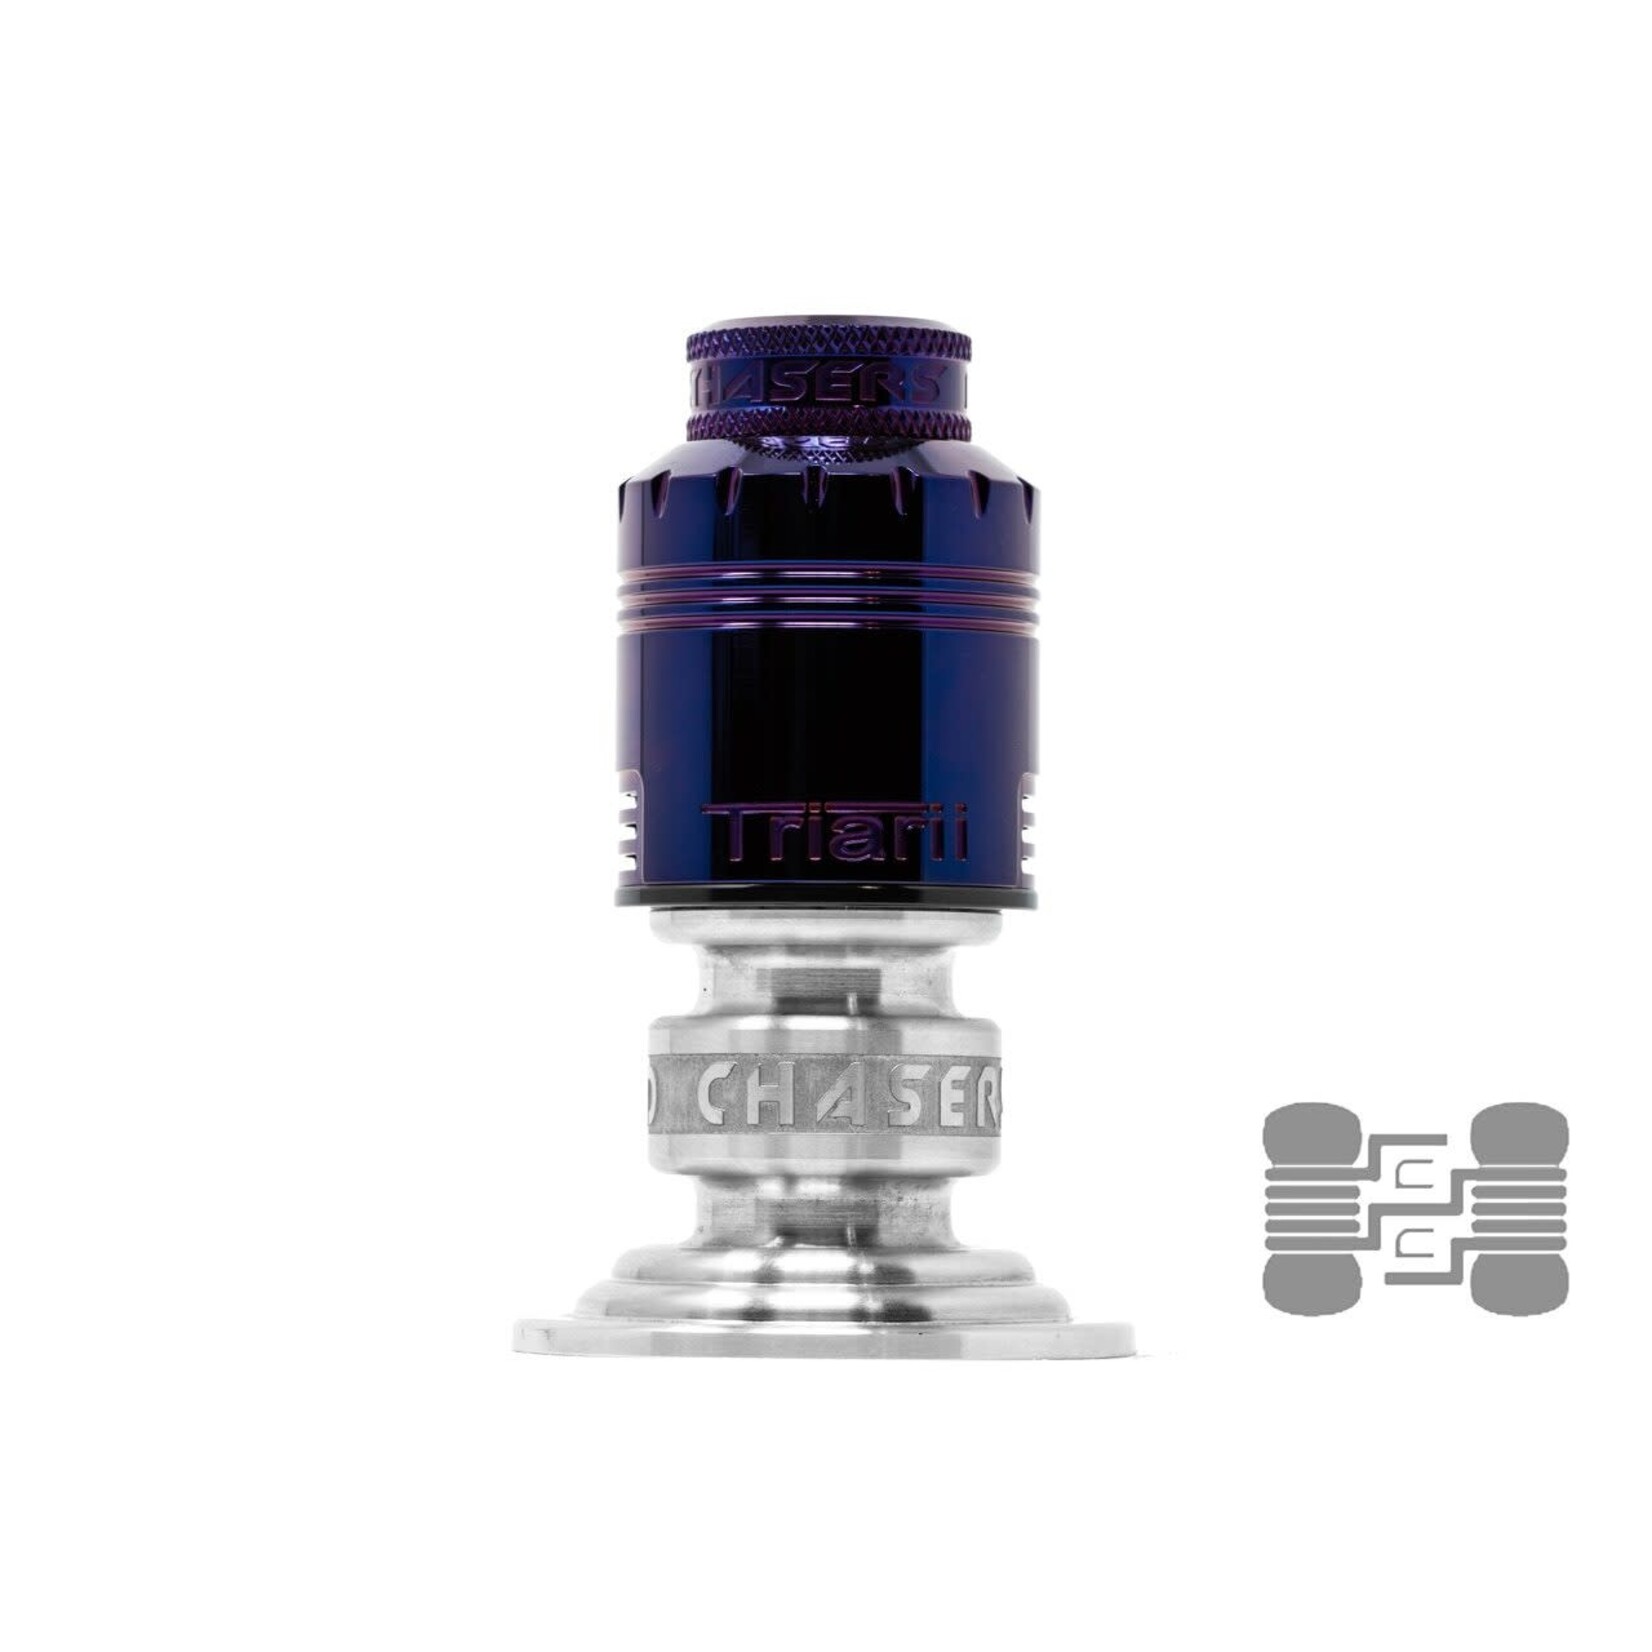 Cloudy Collaborations Cloudy Collabs Triarii RDA 30mm